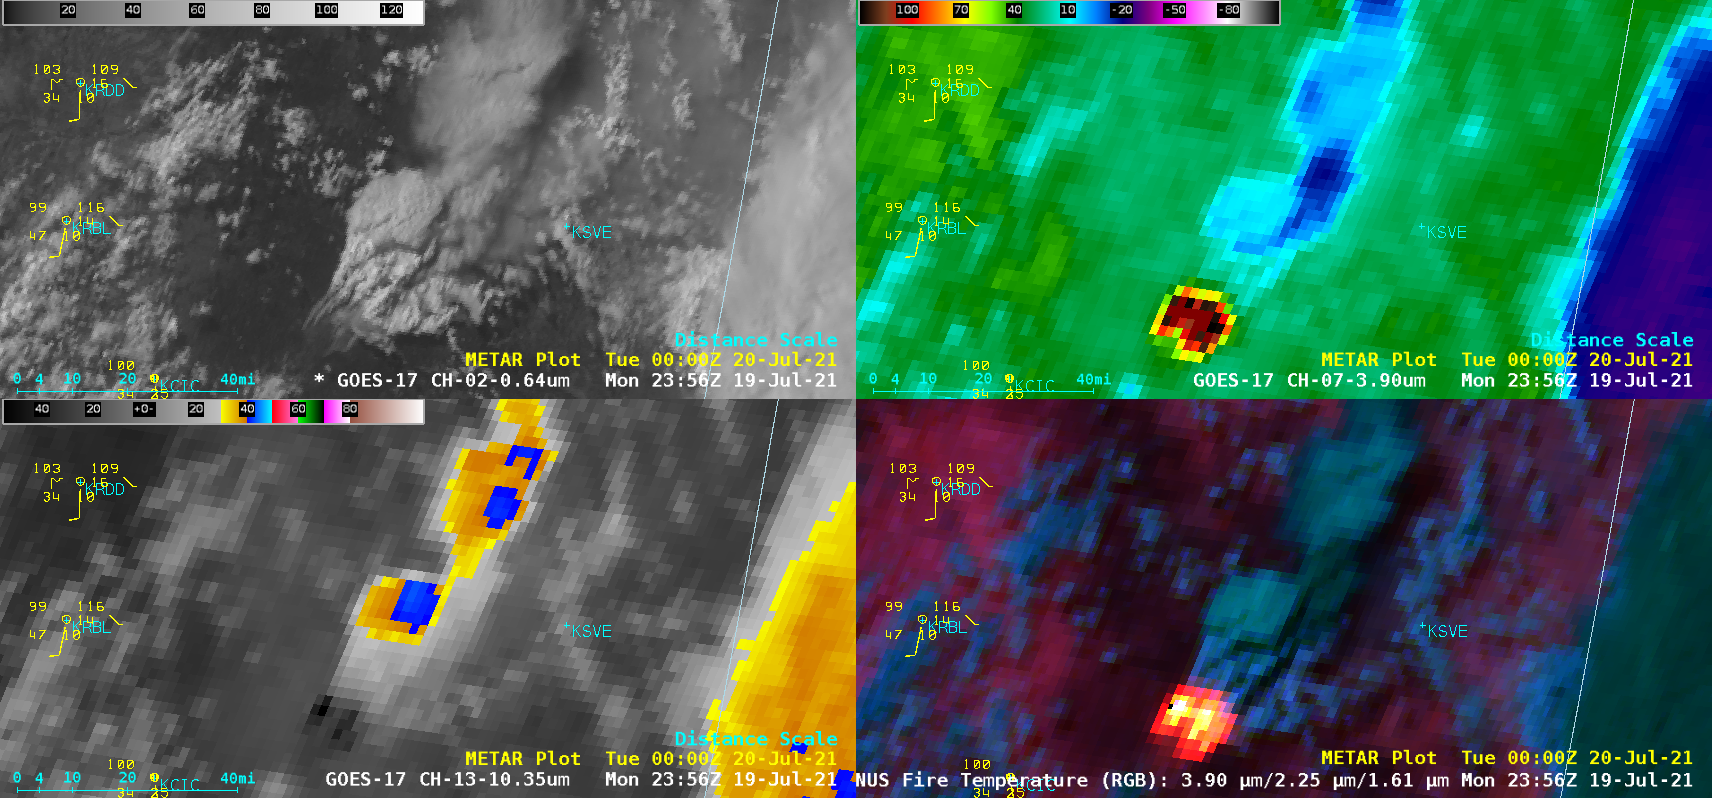 GOES-17 “Red” Visible (0.64 µm, top left), Shortwave Infrared (3.9 µm, top right), “Clean” Infrared Window (10.35 µm, bottom left) and Fire Temperature RGB (bottom right) [click to play animation | MP4]